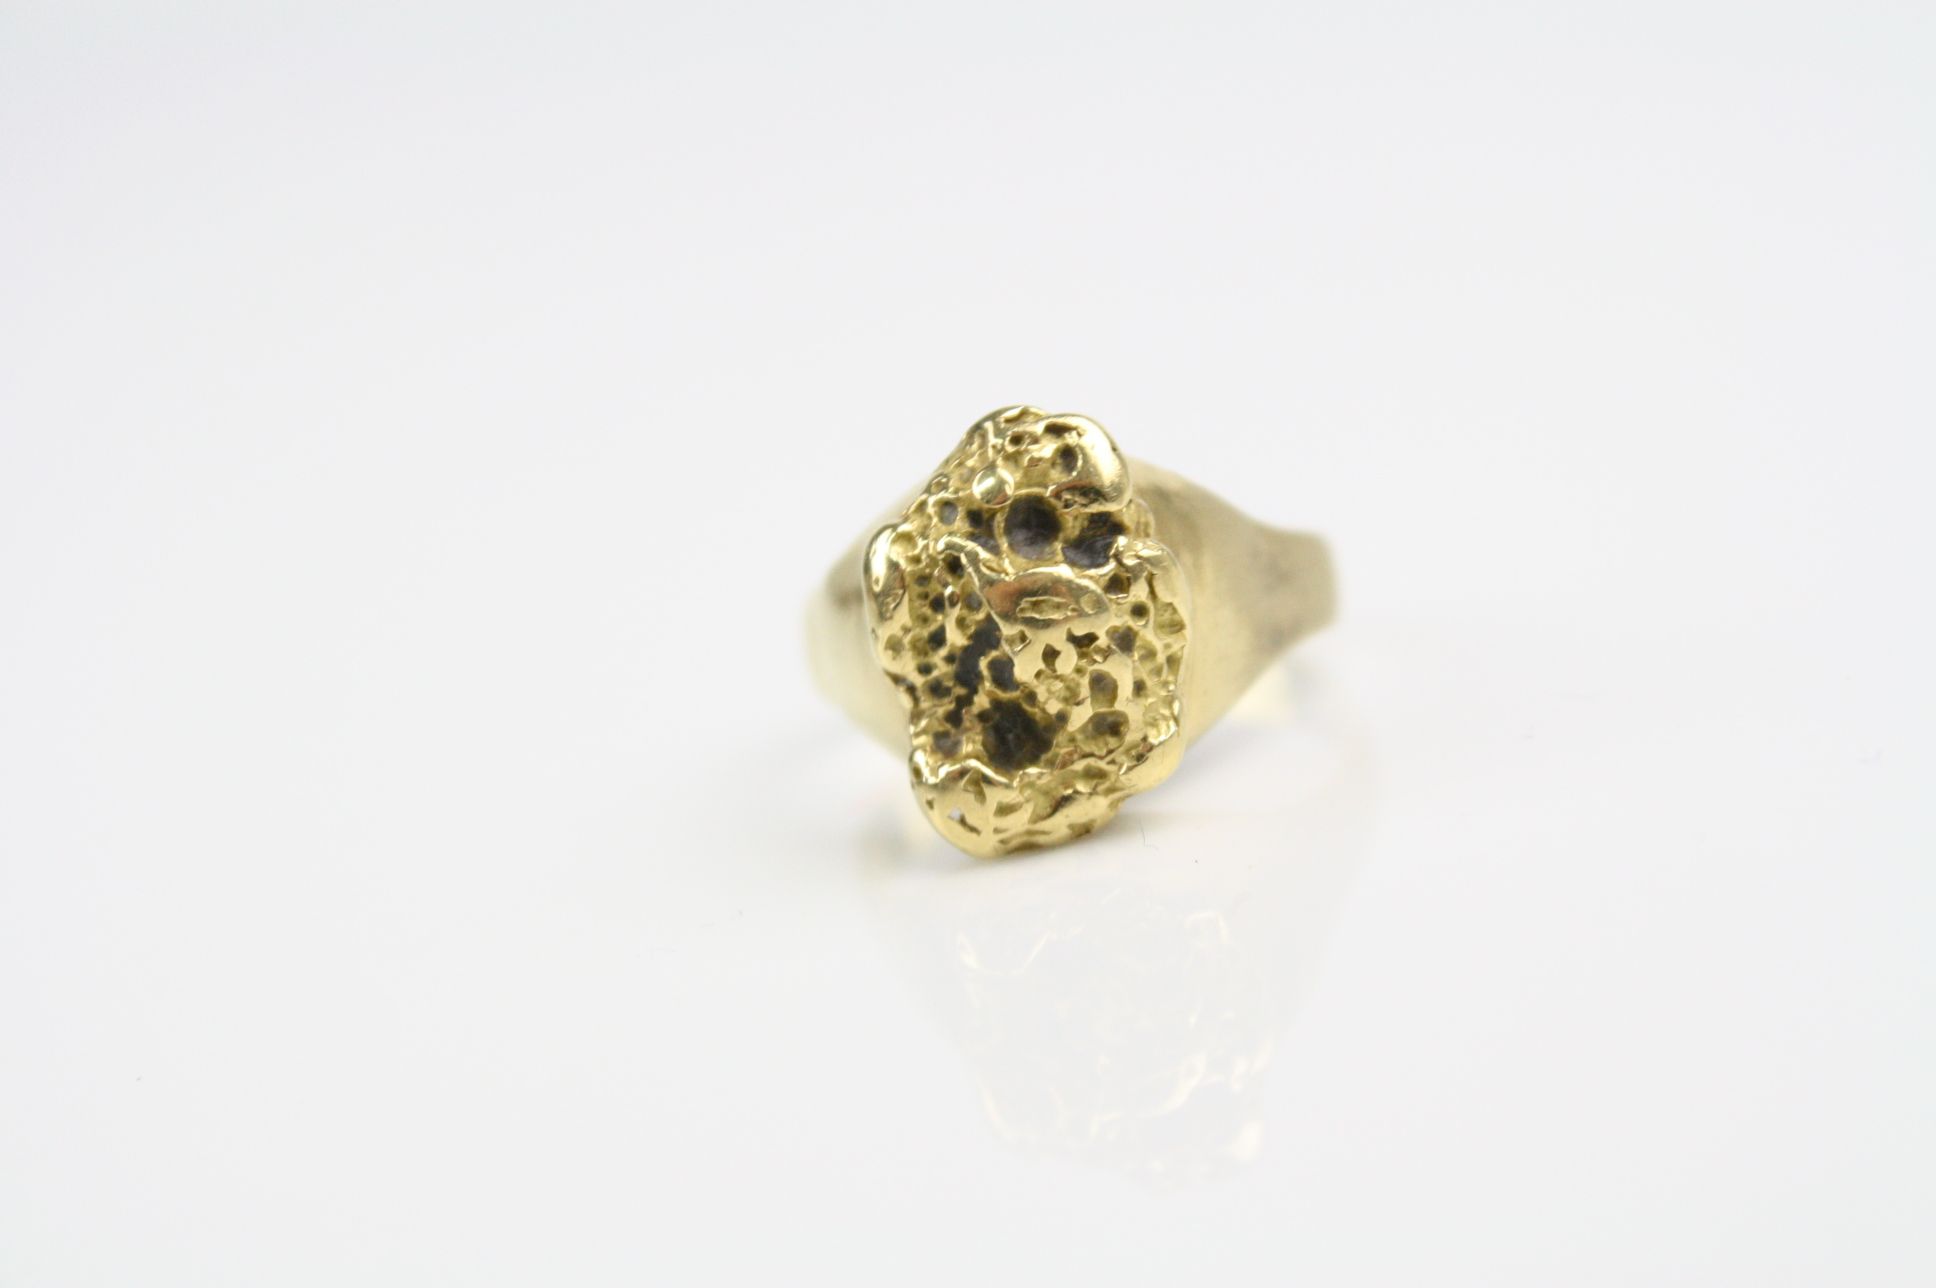 Yellow metal nugget ring, tapered shoulders, ring size O, tests as 22ct gold - Image 6 of 6